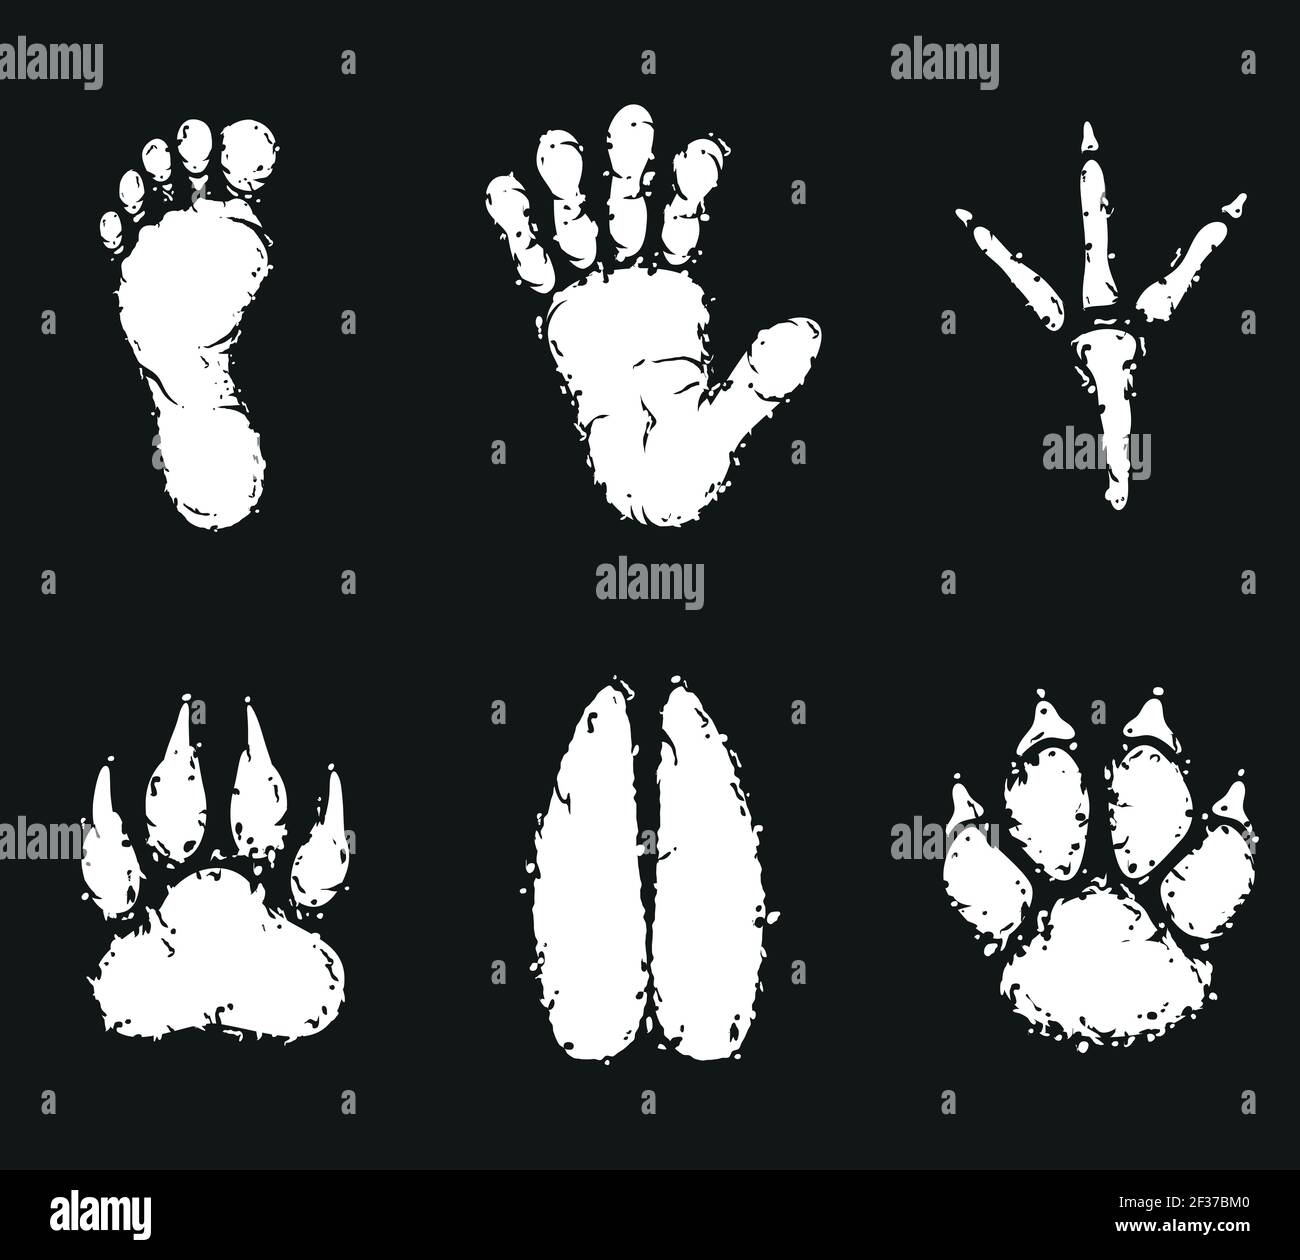 115,767 Animal Footprints Images, Stock Photos, 3D objects